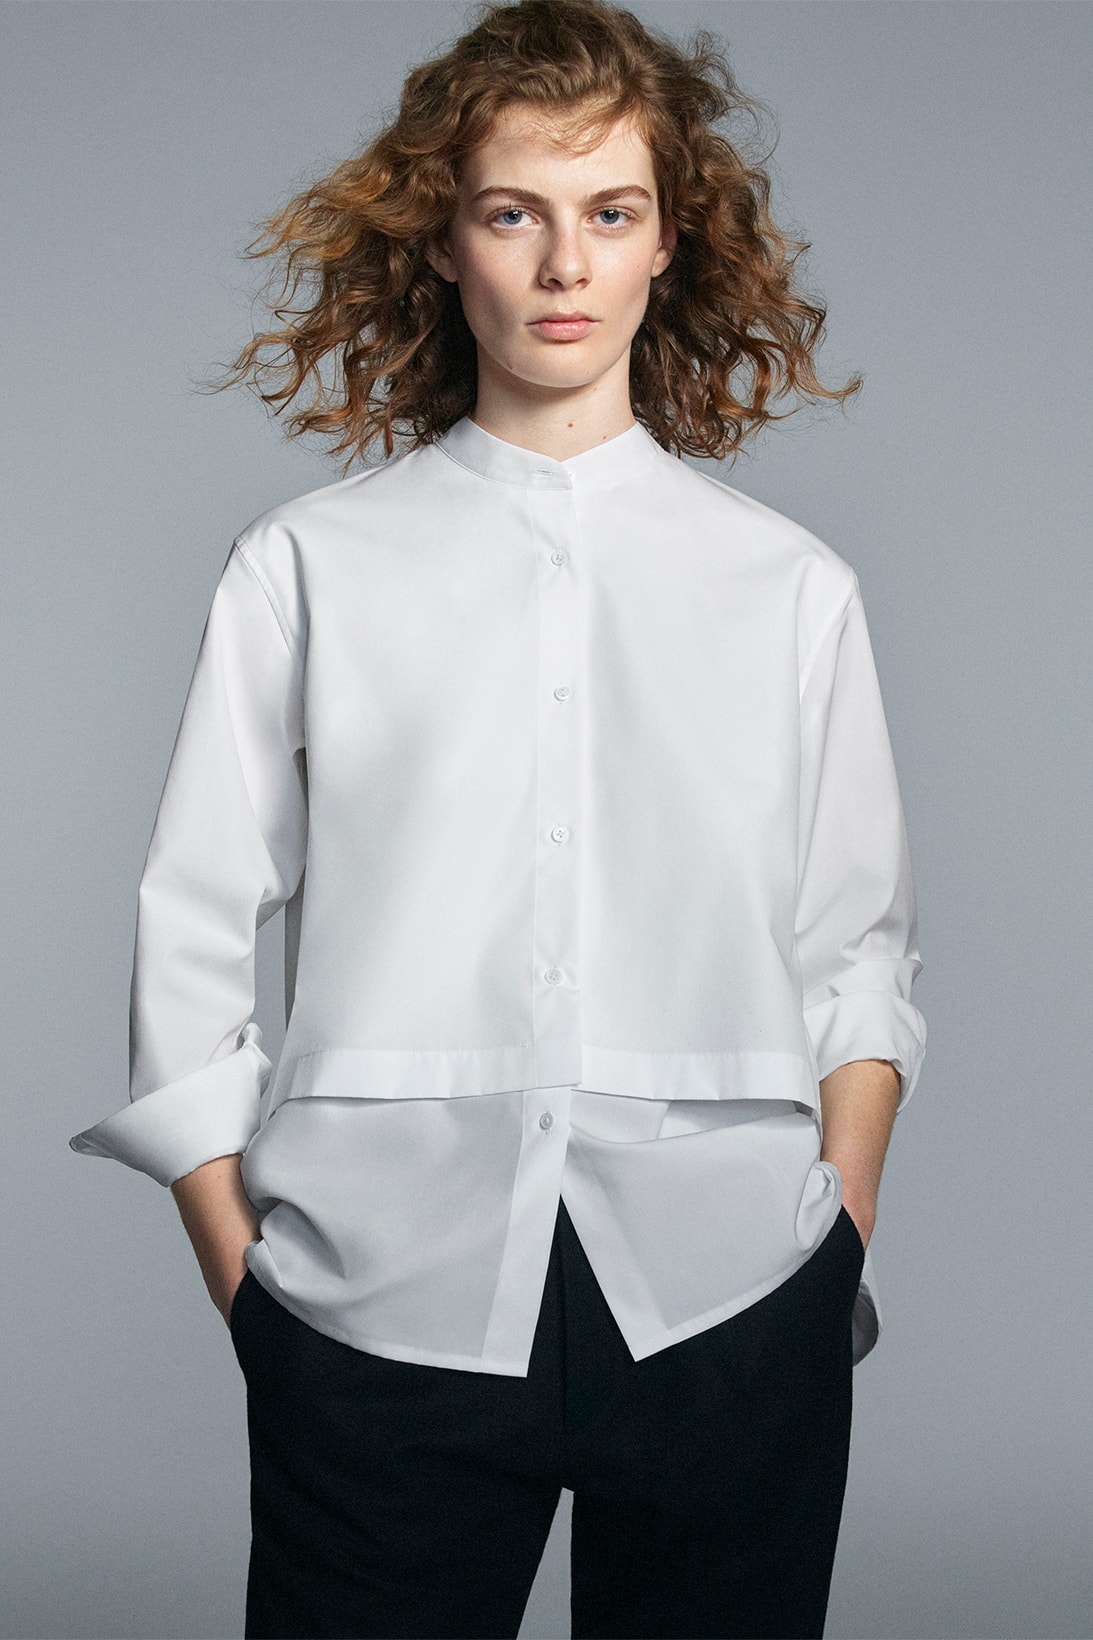 Uniqlo x Jil Sander Newly Re-Launched +J Collection